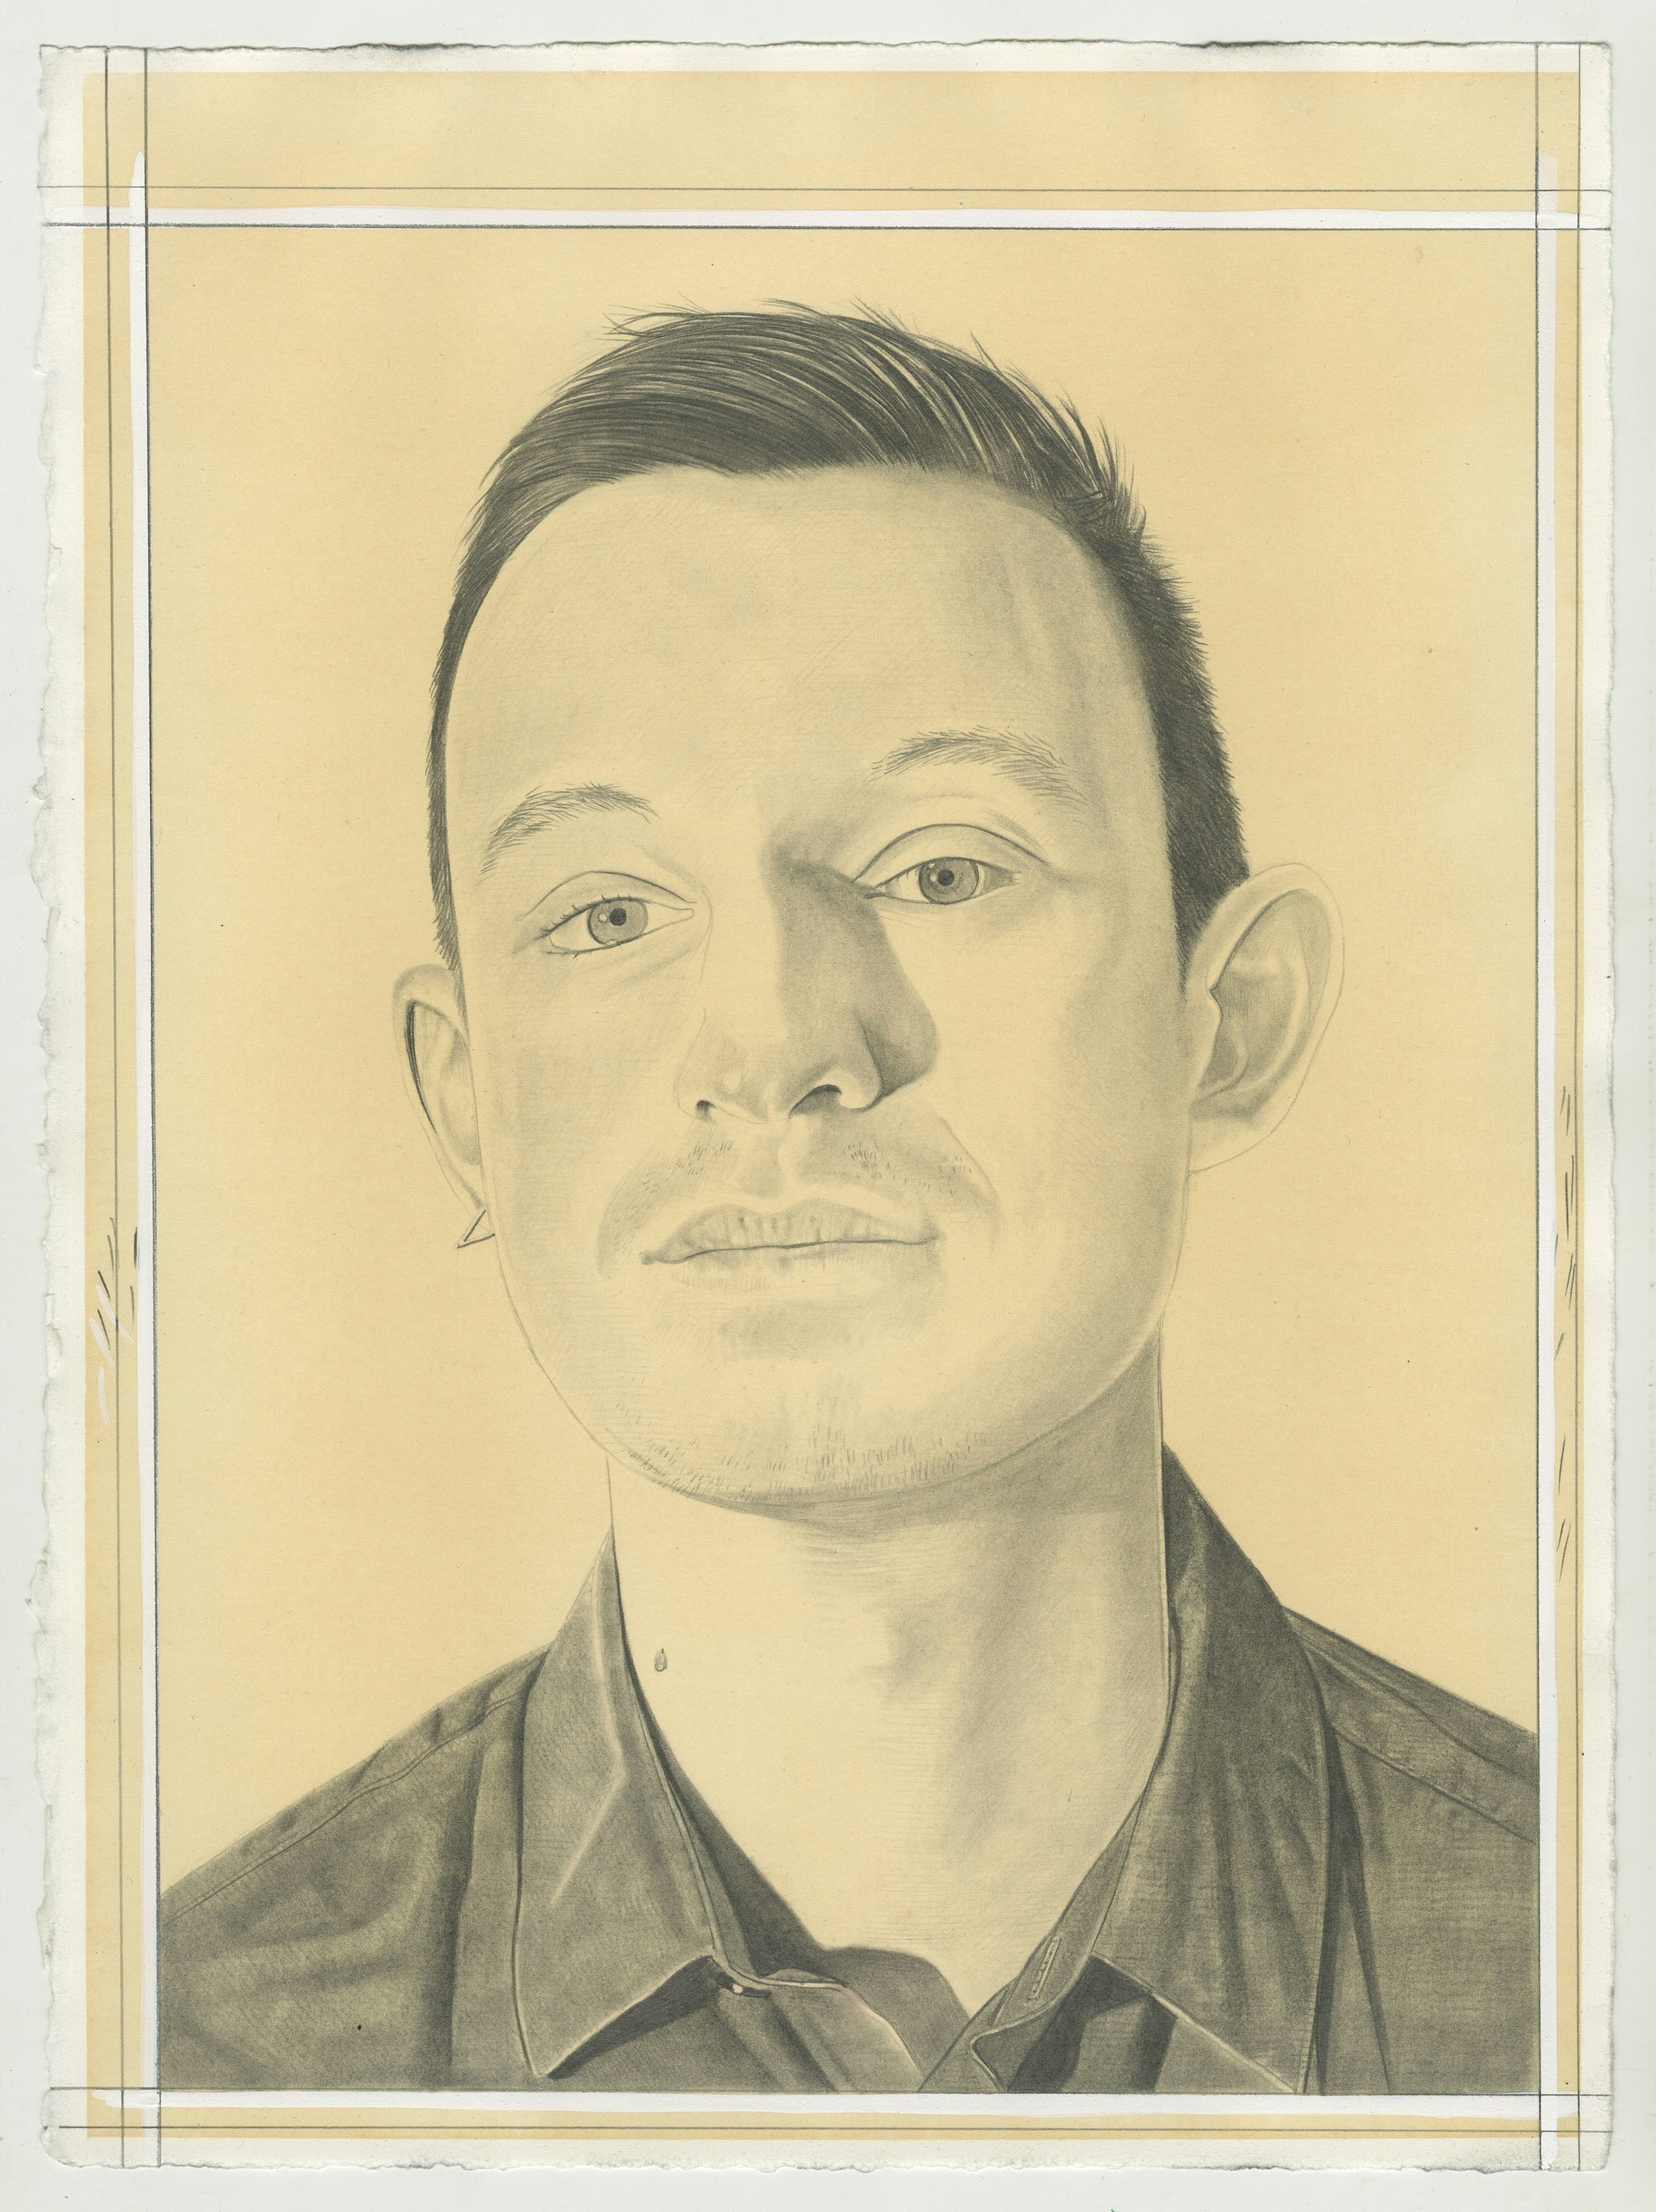 Portrait of Kyle Dacuyan, pencil on paper by Phong Bui.